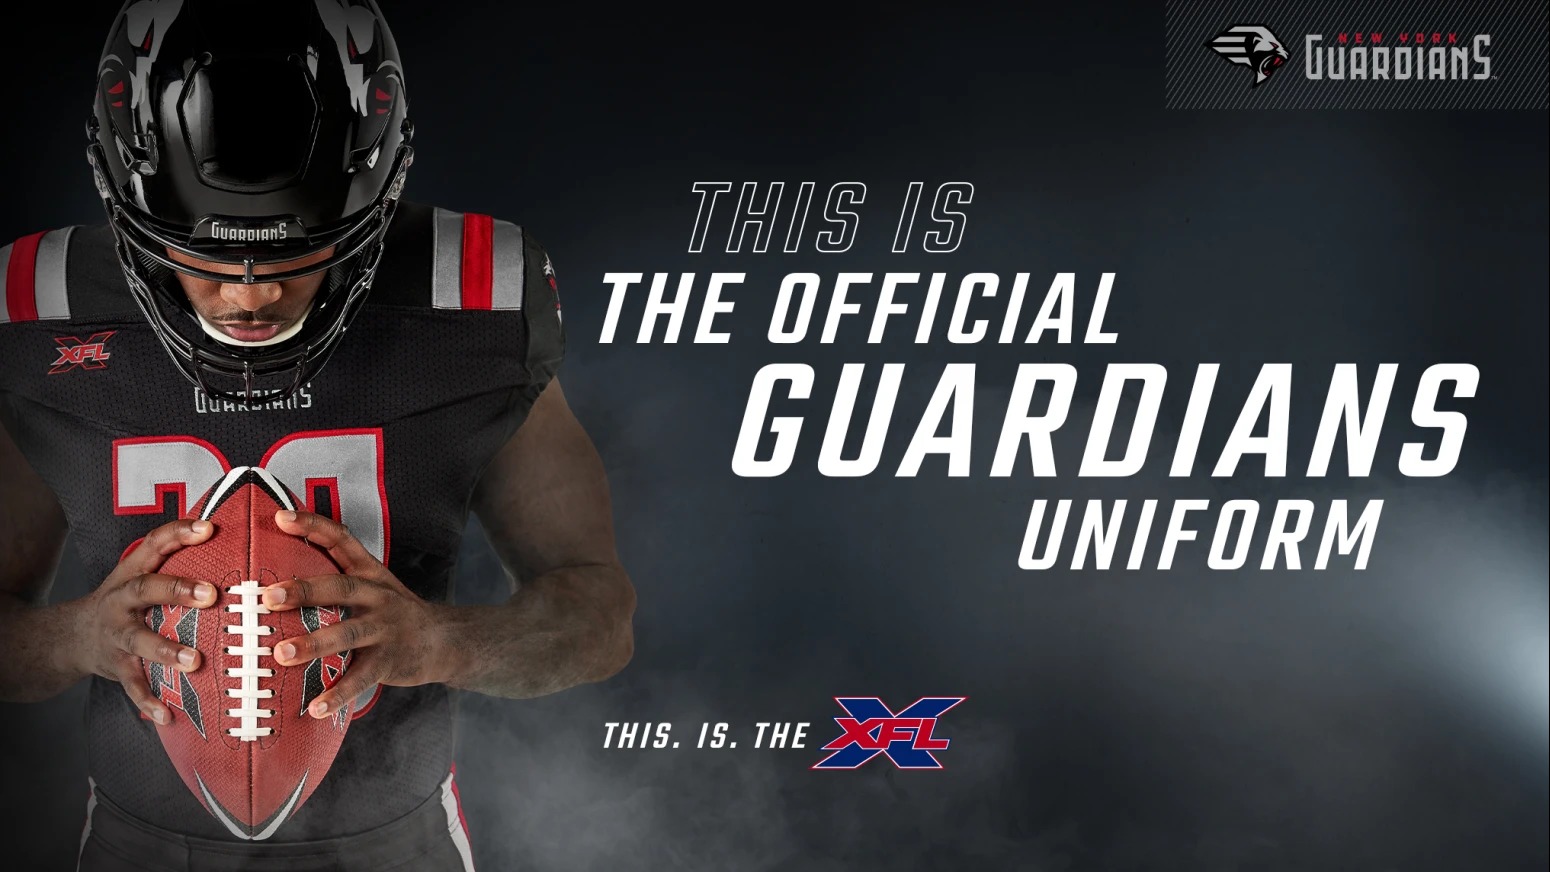 Introducing the New York Guardians' Uniforms - XFL News and Discussion